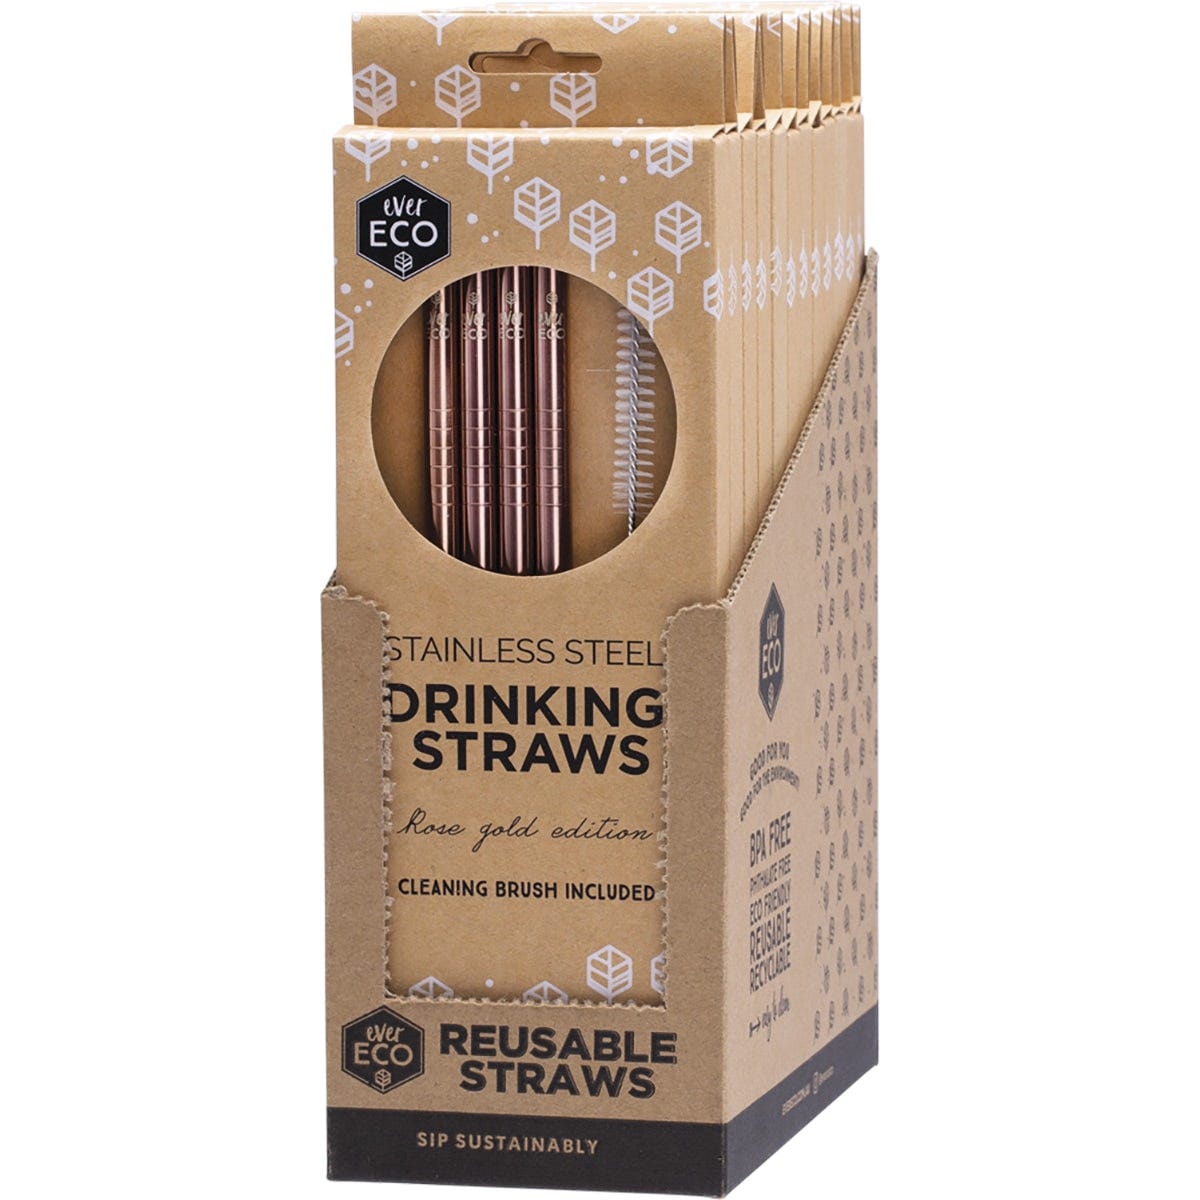 Ever Eco Stainless Steel Straws Straight Rose Gold